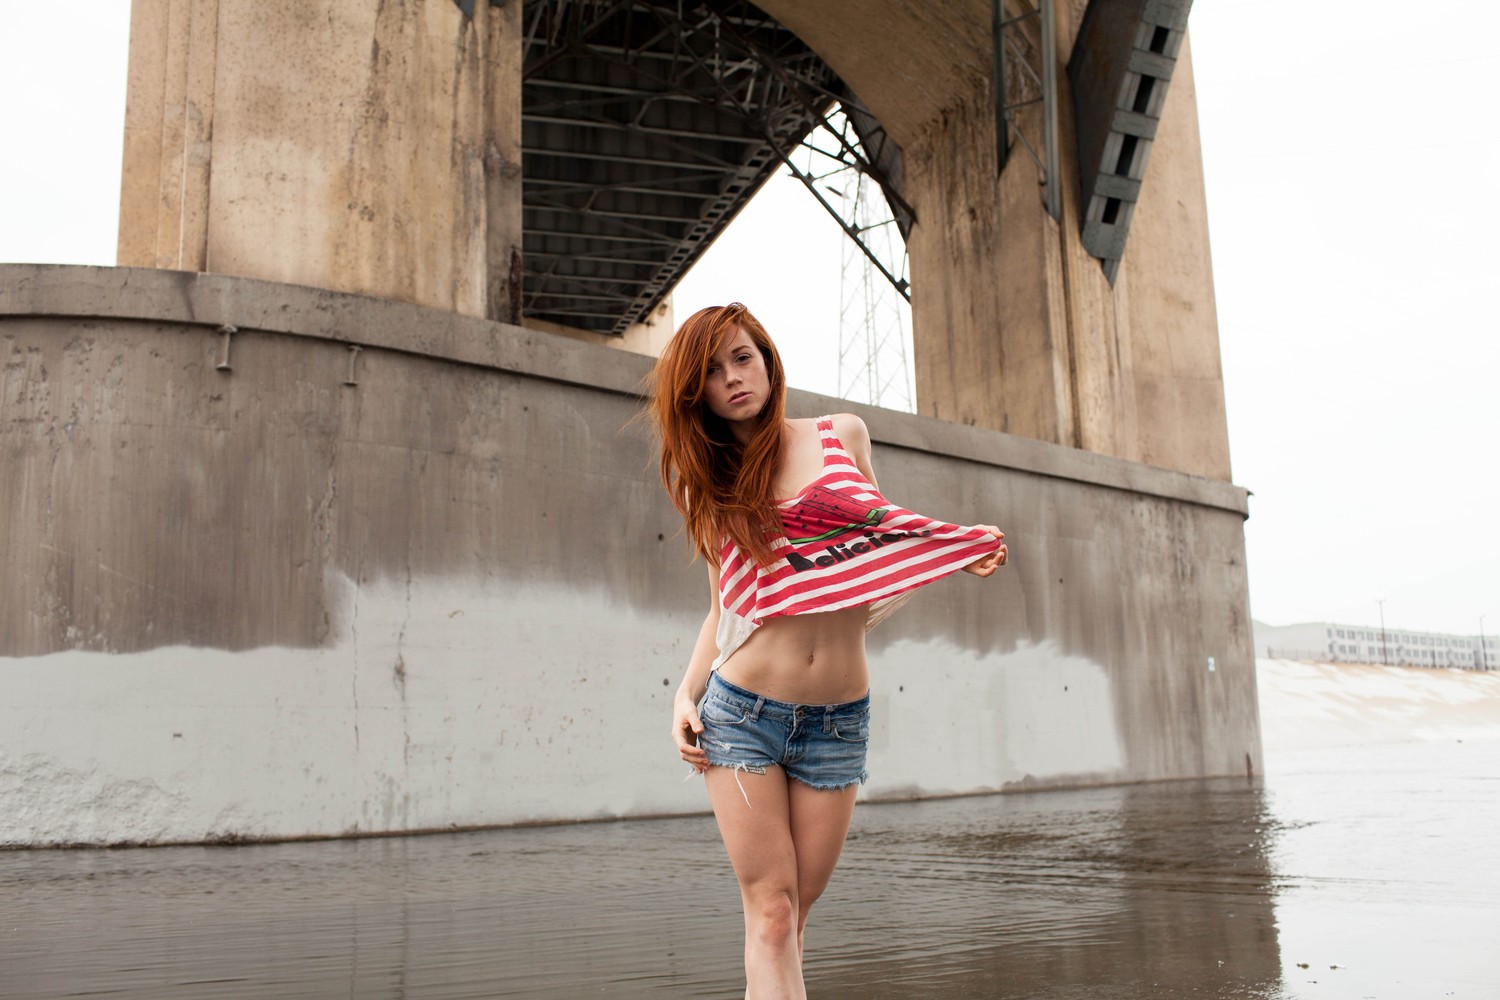 People 1500x1000 redhead face women jean shorts women outdoors belly pulling clothing long hair standing bridge outdoors model striped clothing